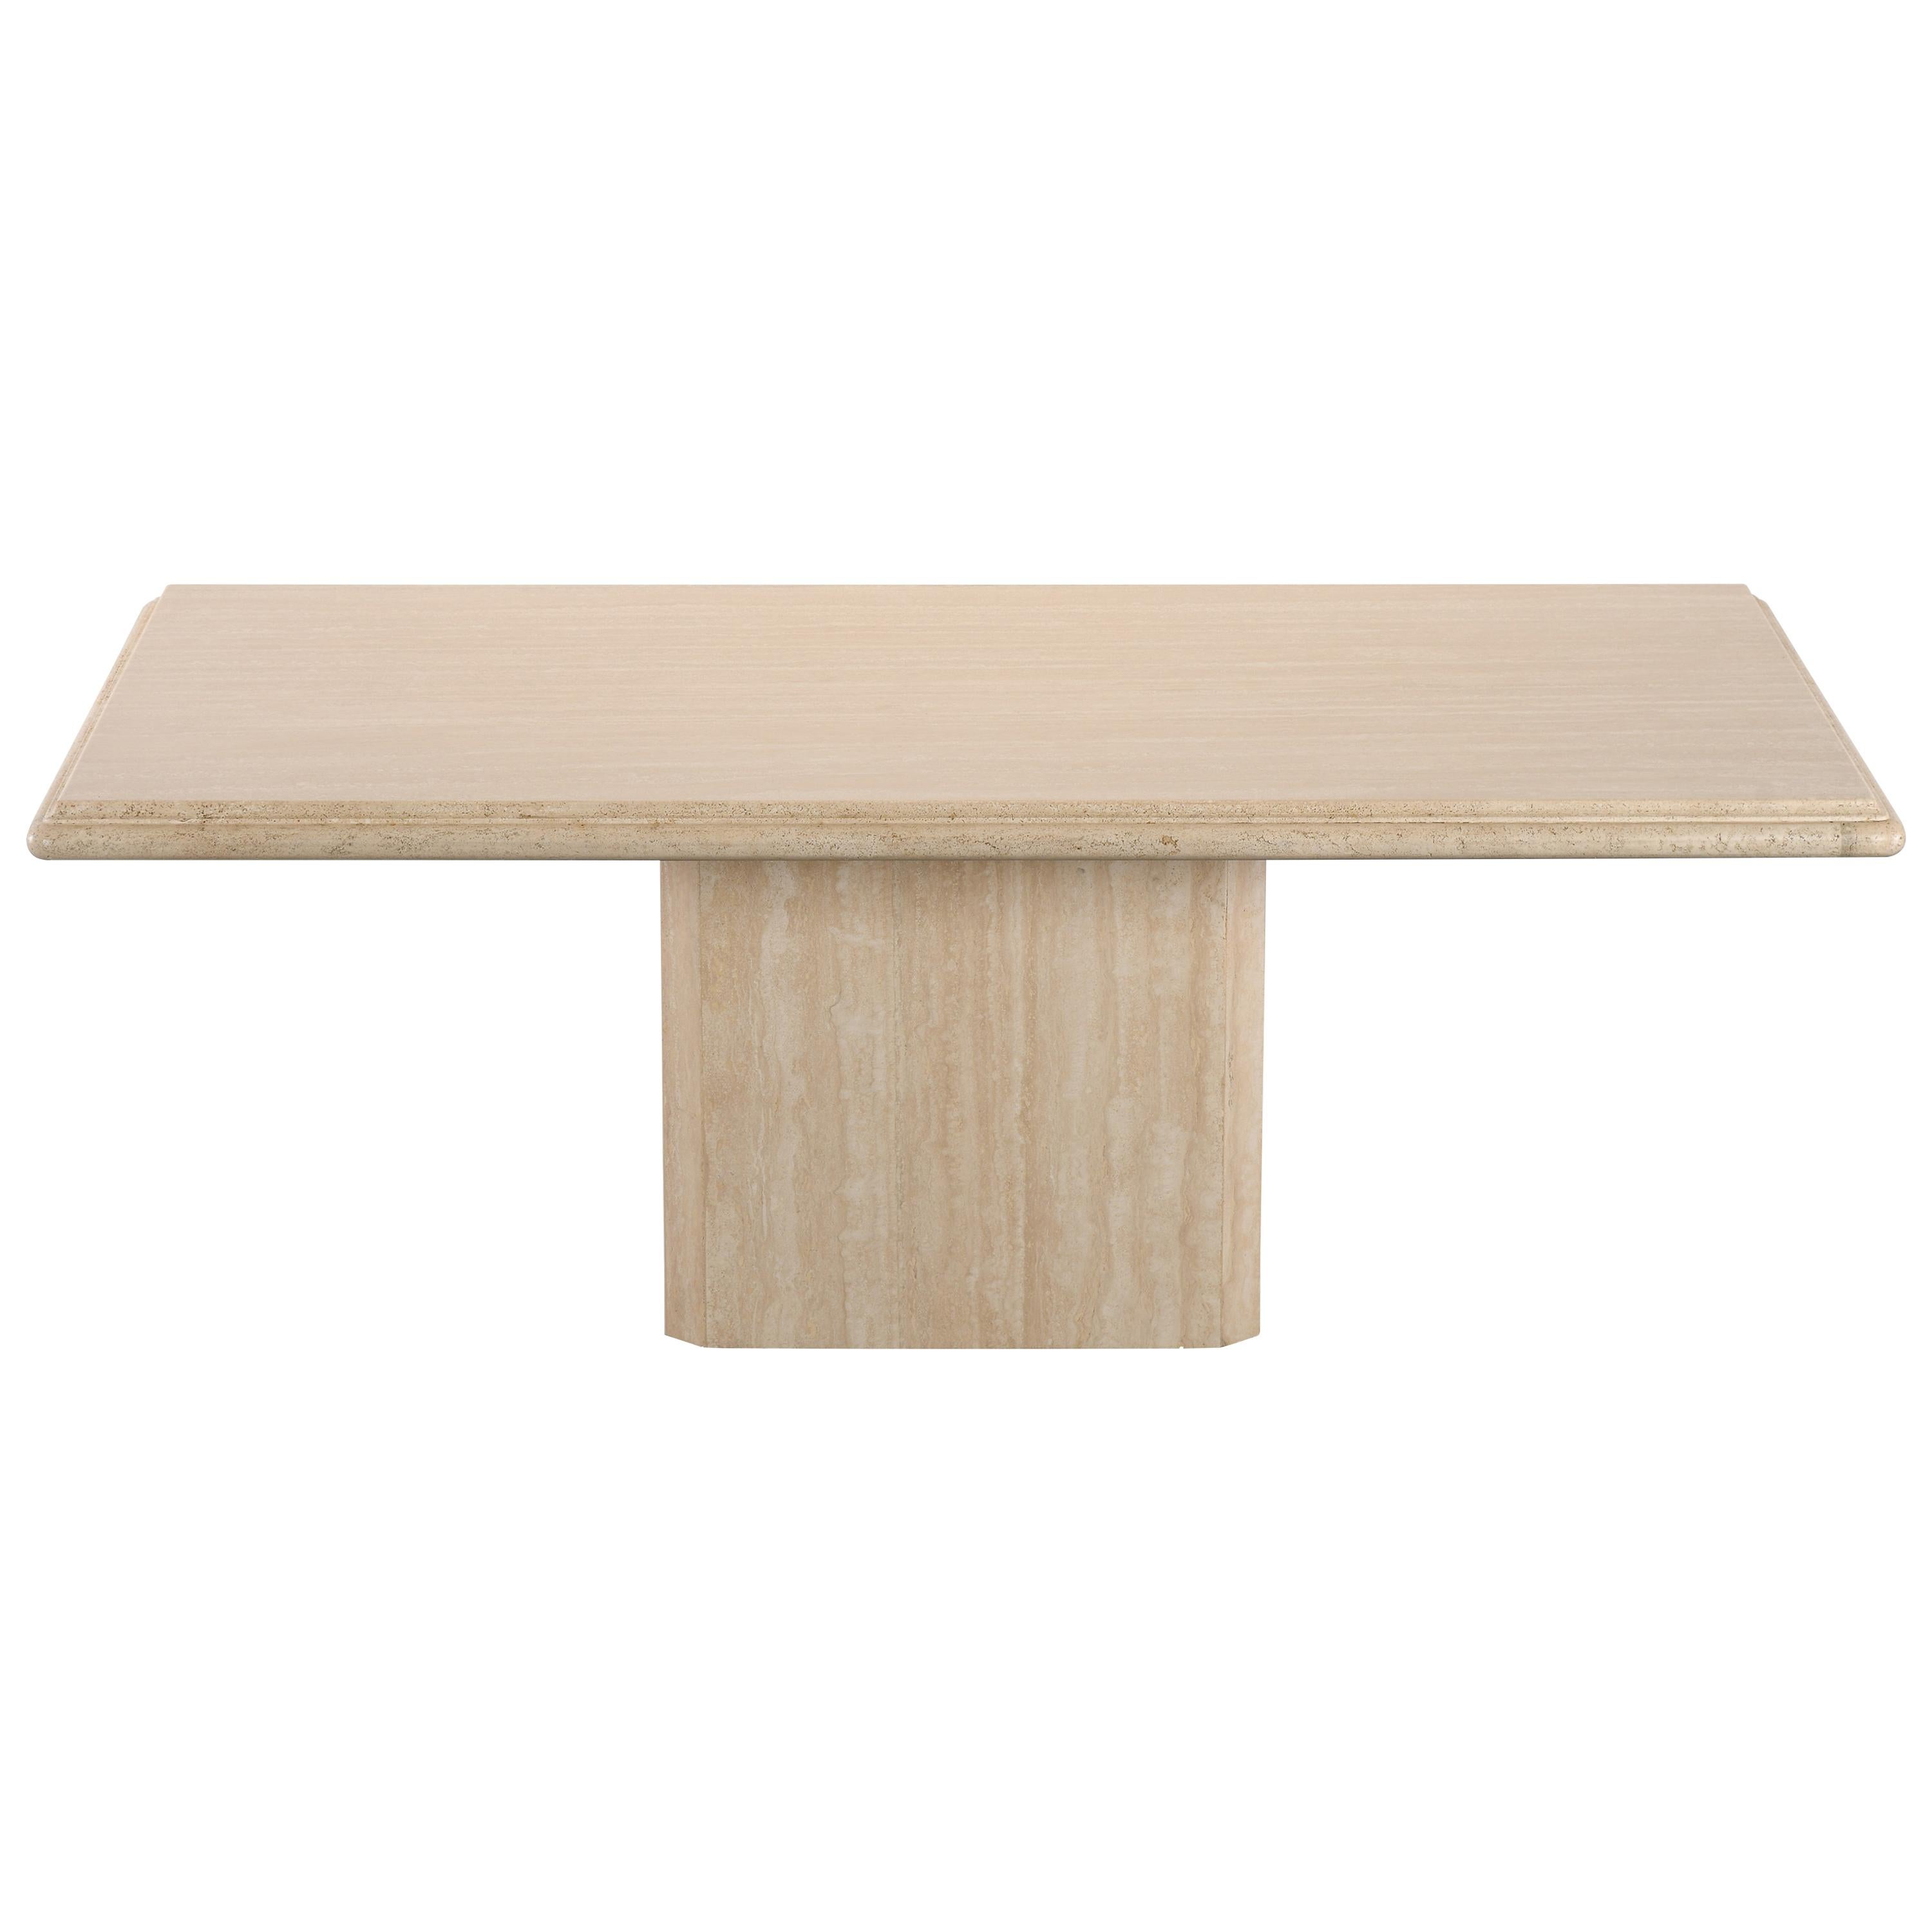 Roche Bobois Style Travertine Dining Table, 1980s